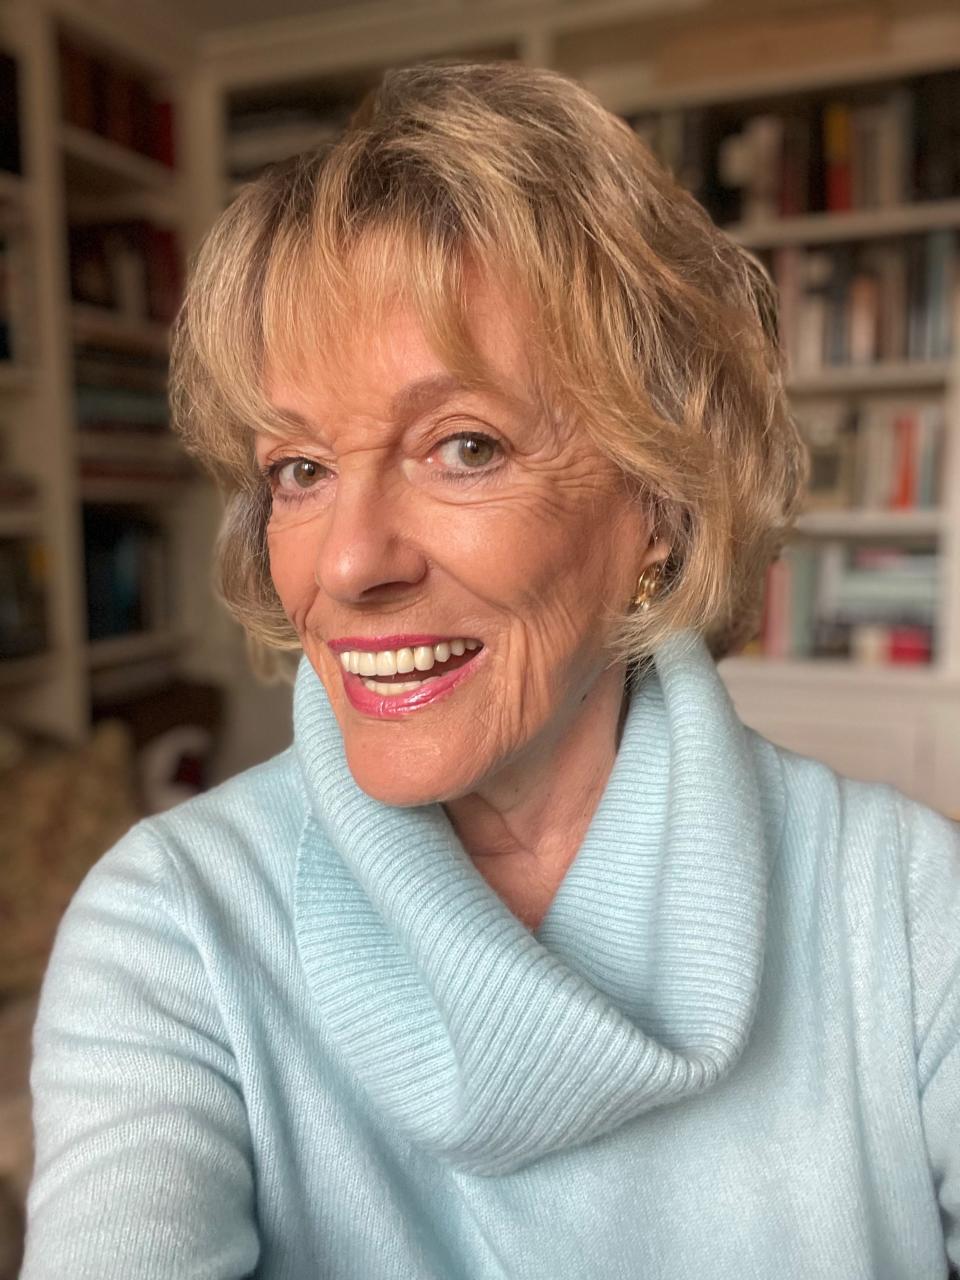 Dame Esther Rantzen has revealed she has been diagnosed with lung cancer, which has spread to other areas of her body (Dame Esther Rantzen/PA)